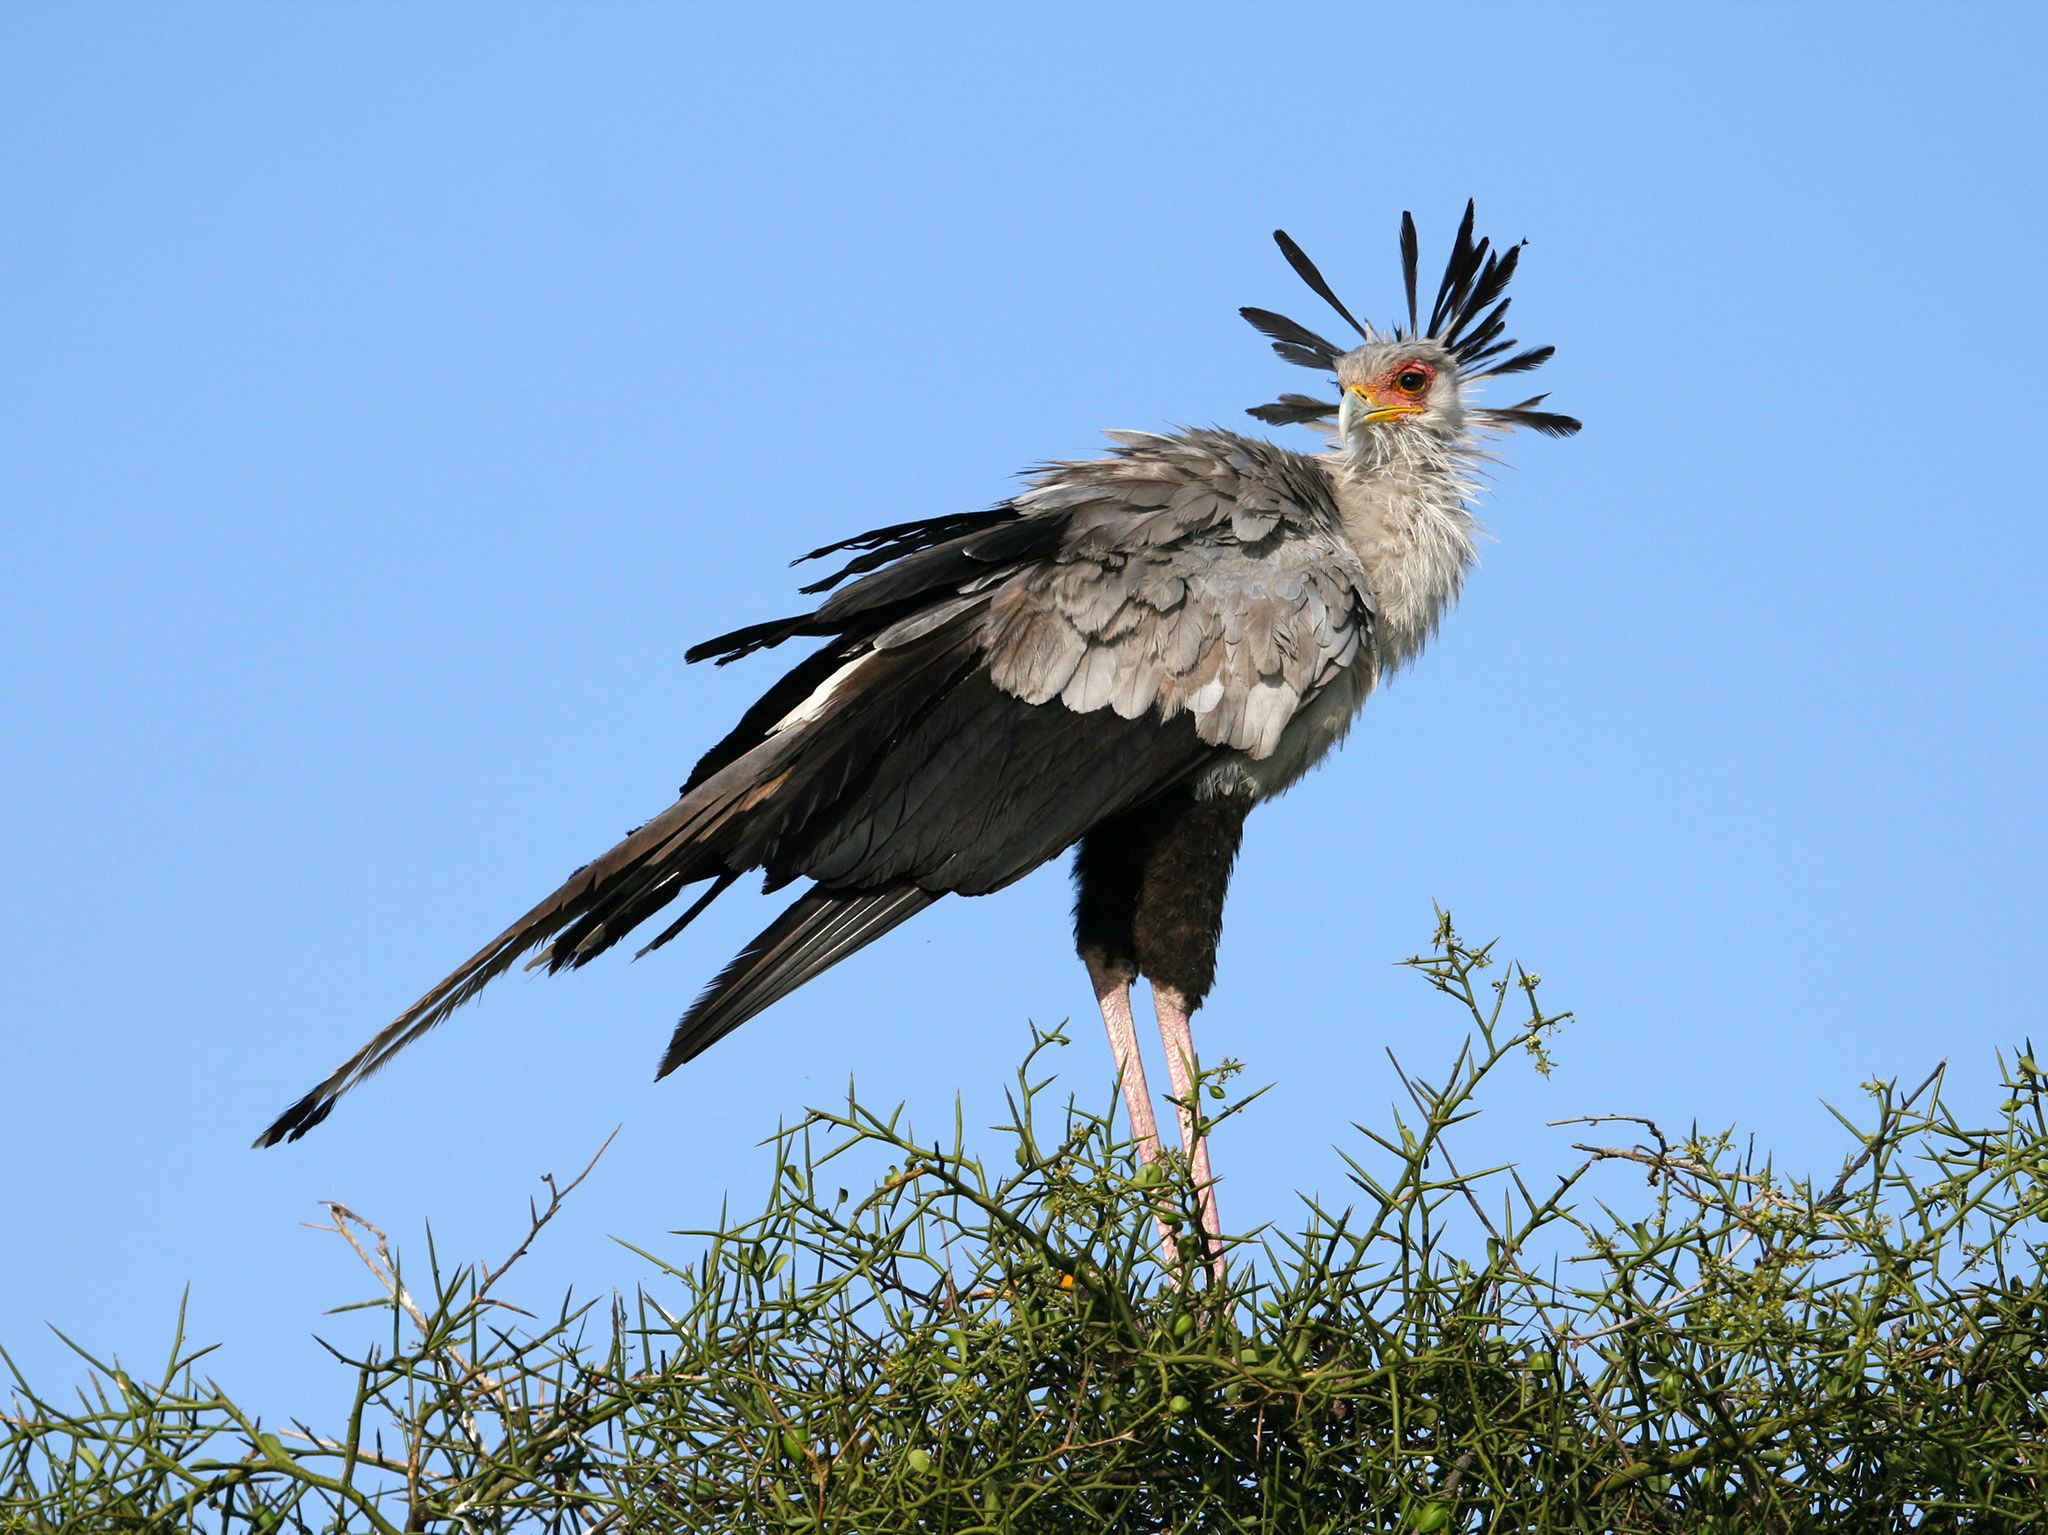 Athi Kapiti, Kenya: An adult secretary bird surveys the savanna from the top of a tree. This... [Photo of the day - October 2017]